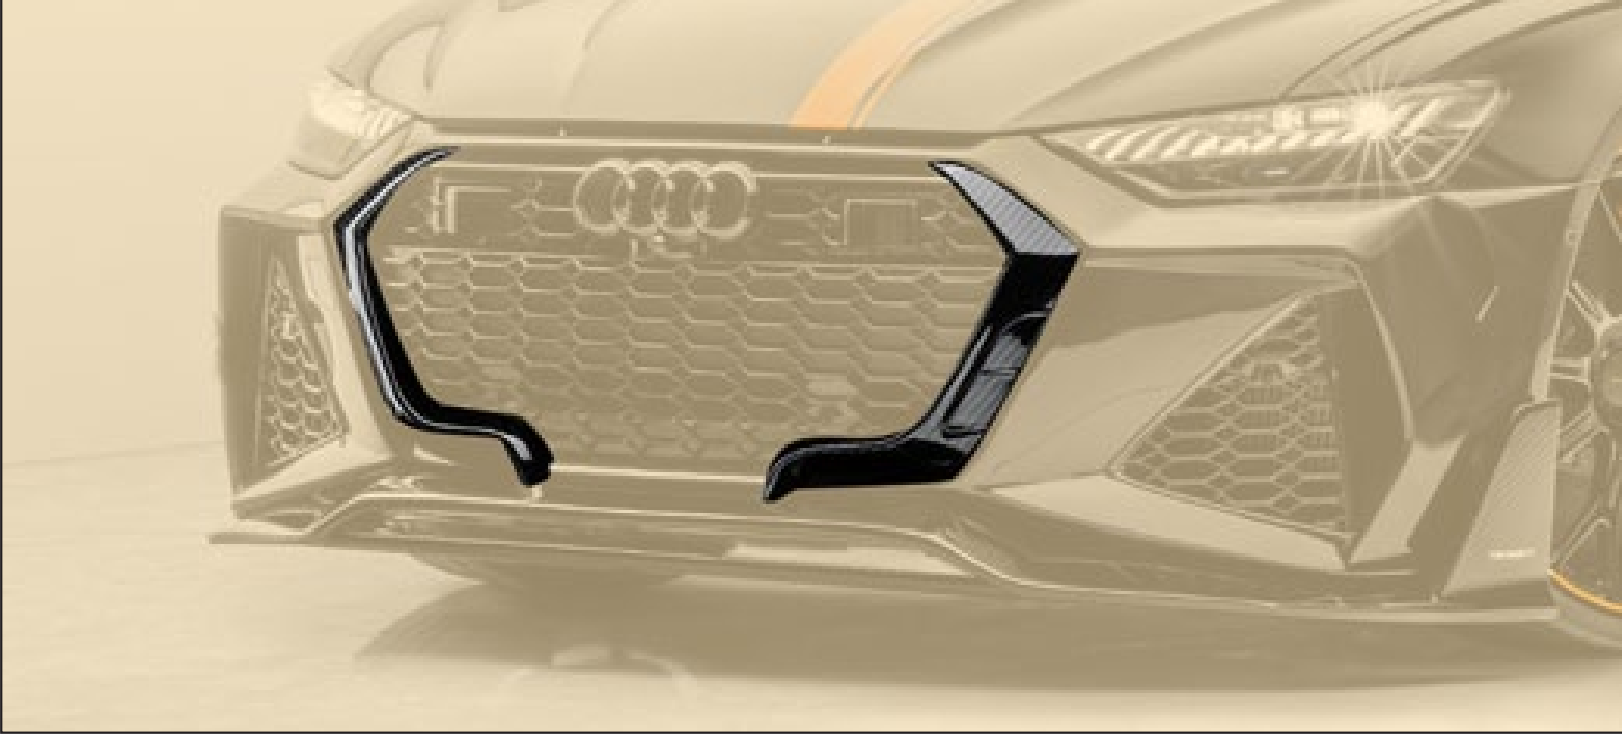 check price and buy Mansory RS6 carbon front grille